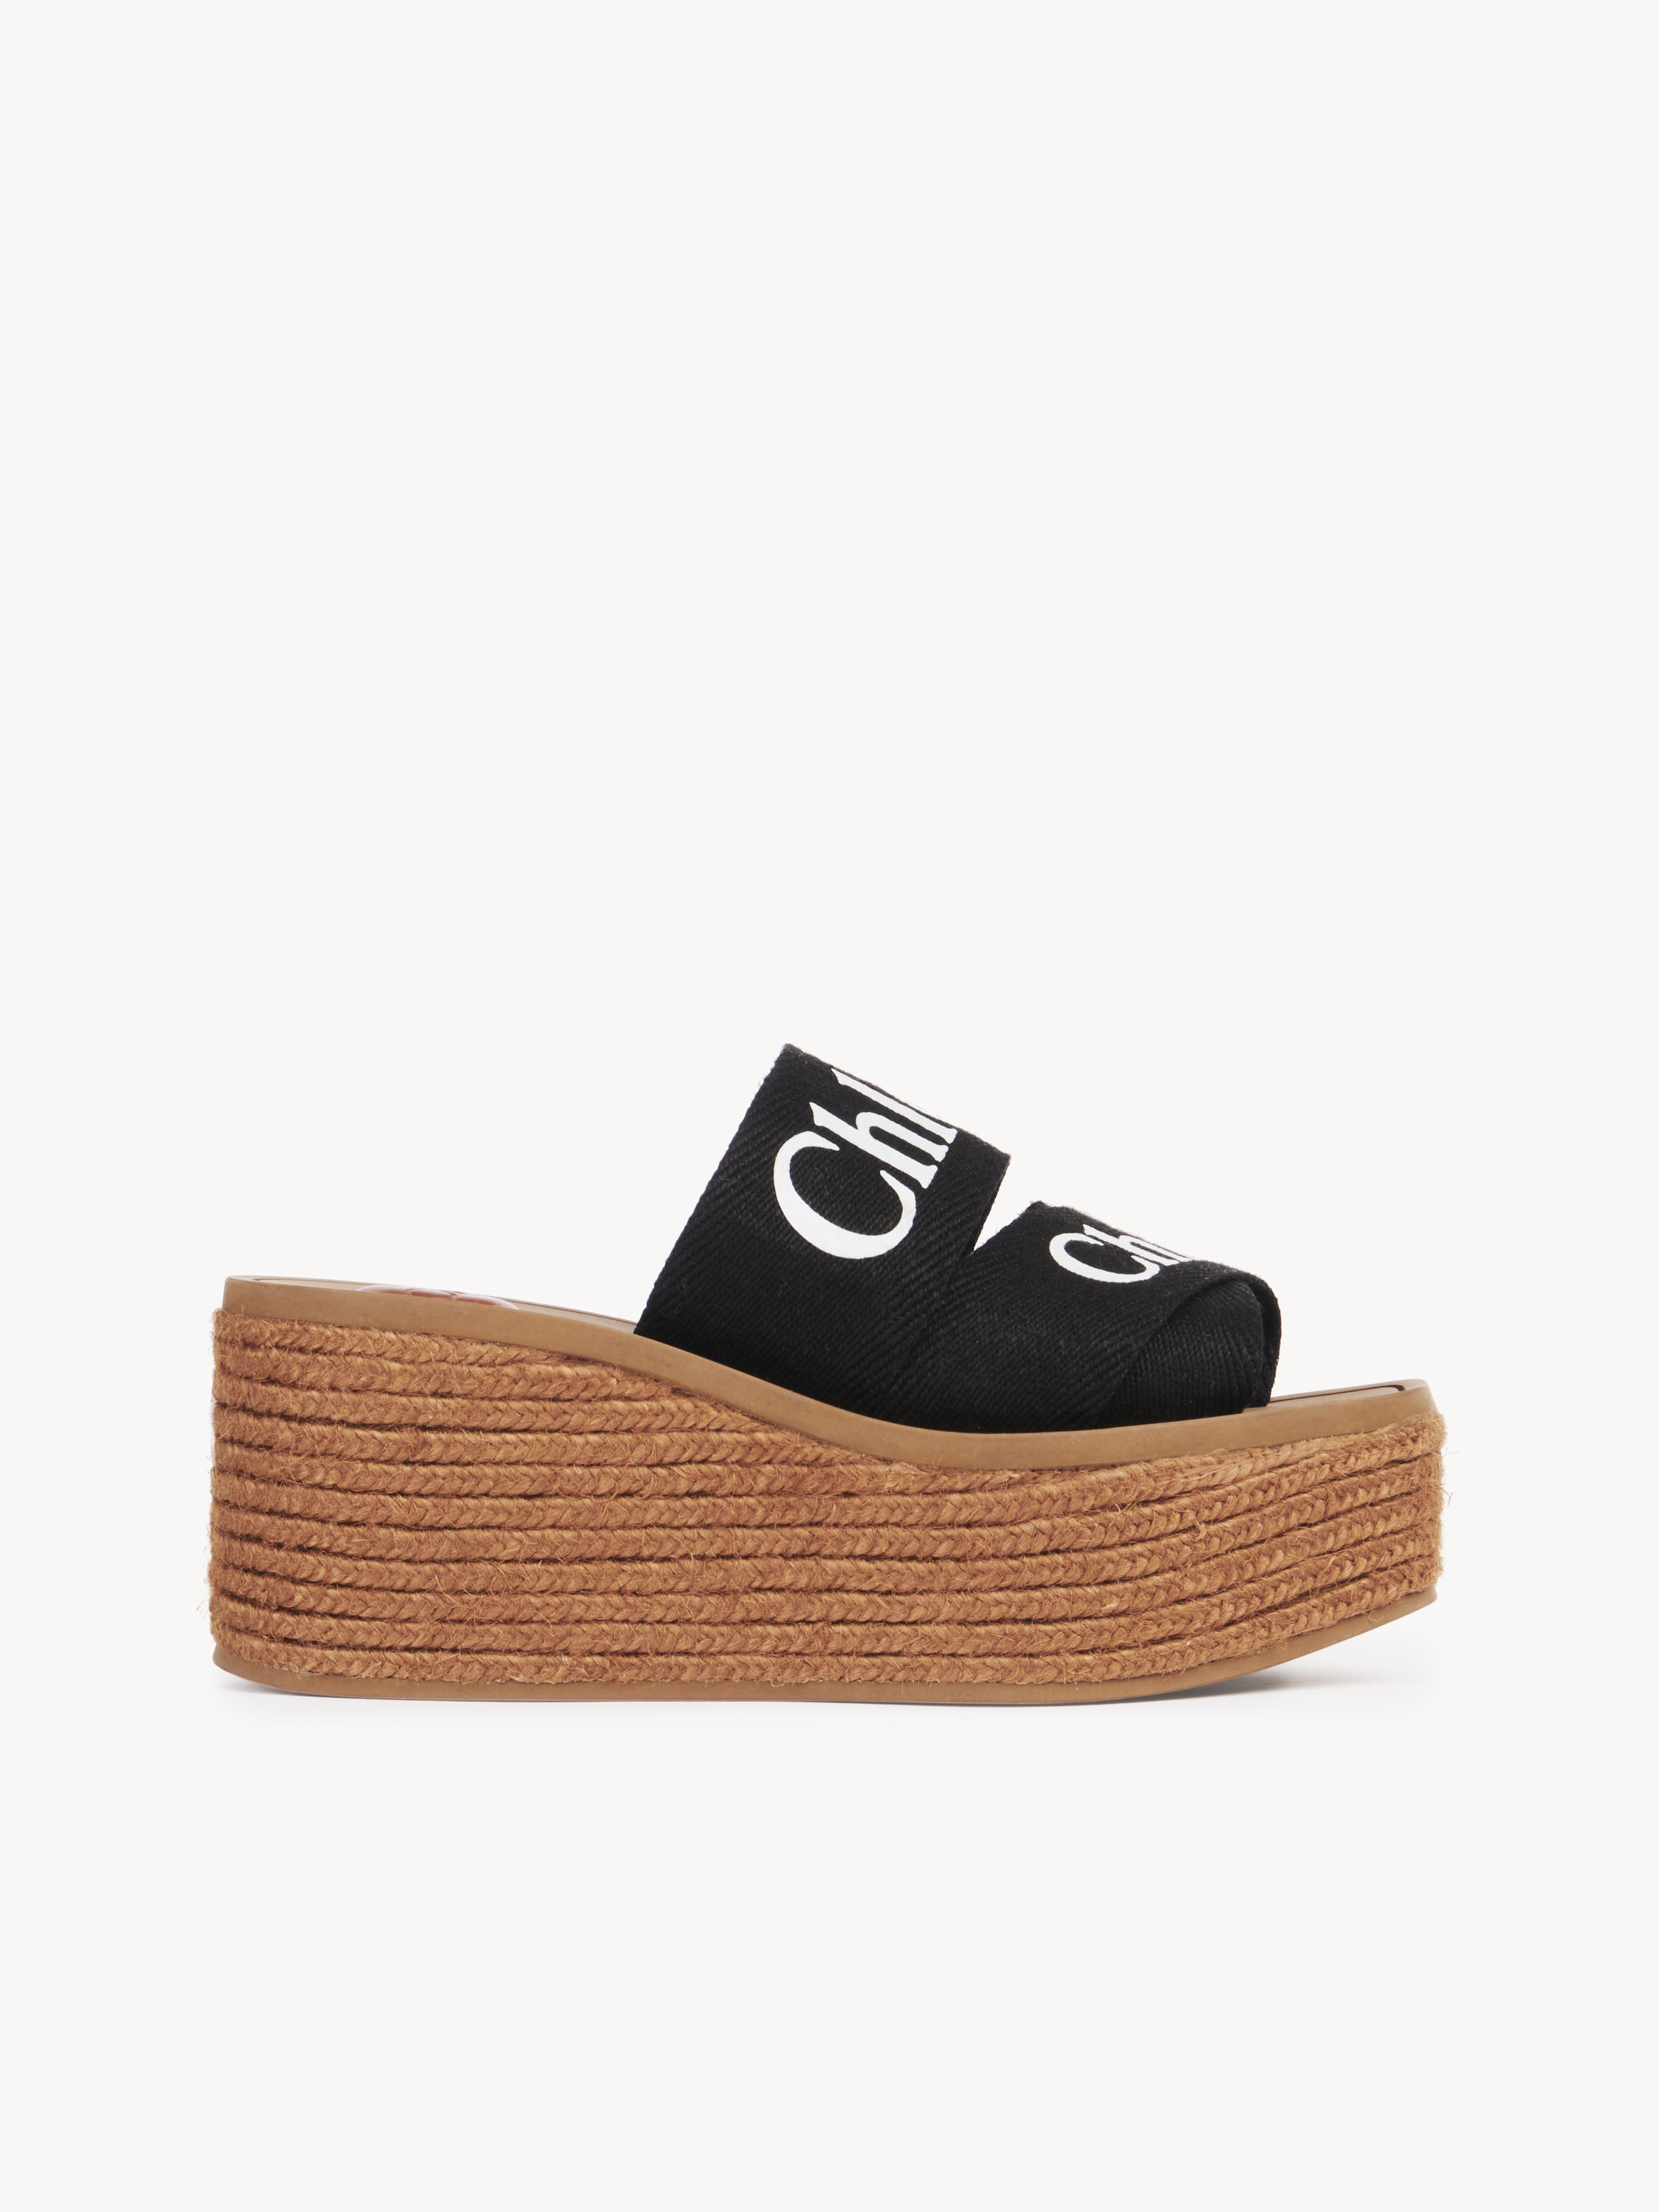 Chloé Mules Espadrilles Woody Femme Noir Taille 36 90% Lin, 10% Polyester, Quercus Suber, Farmed, Coo Spai